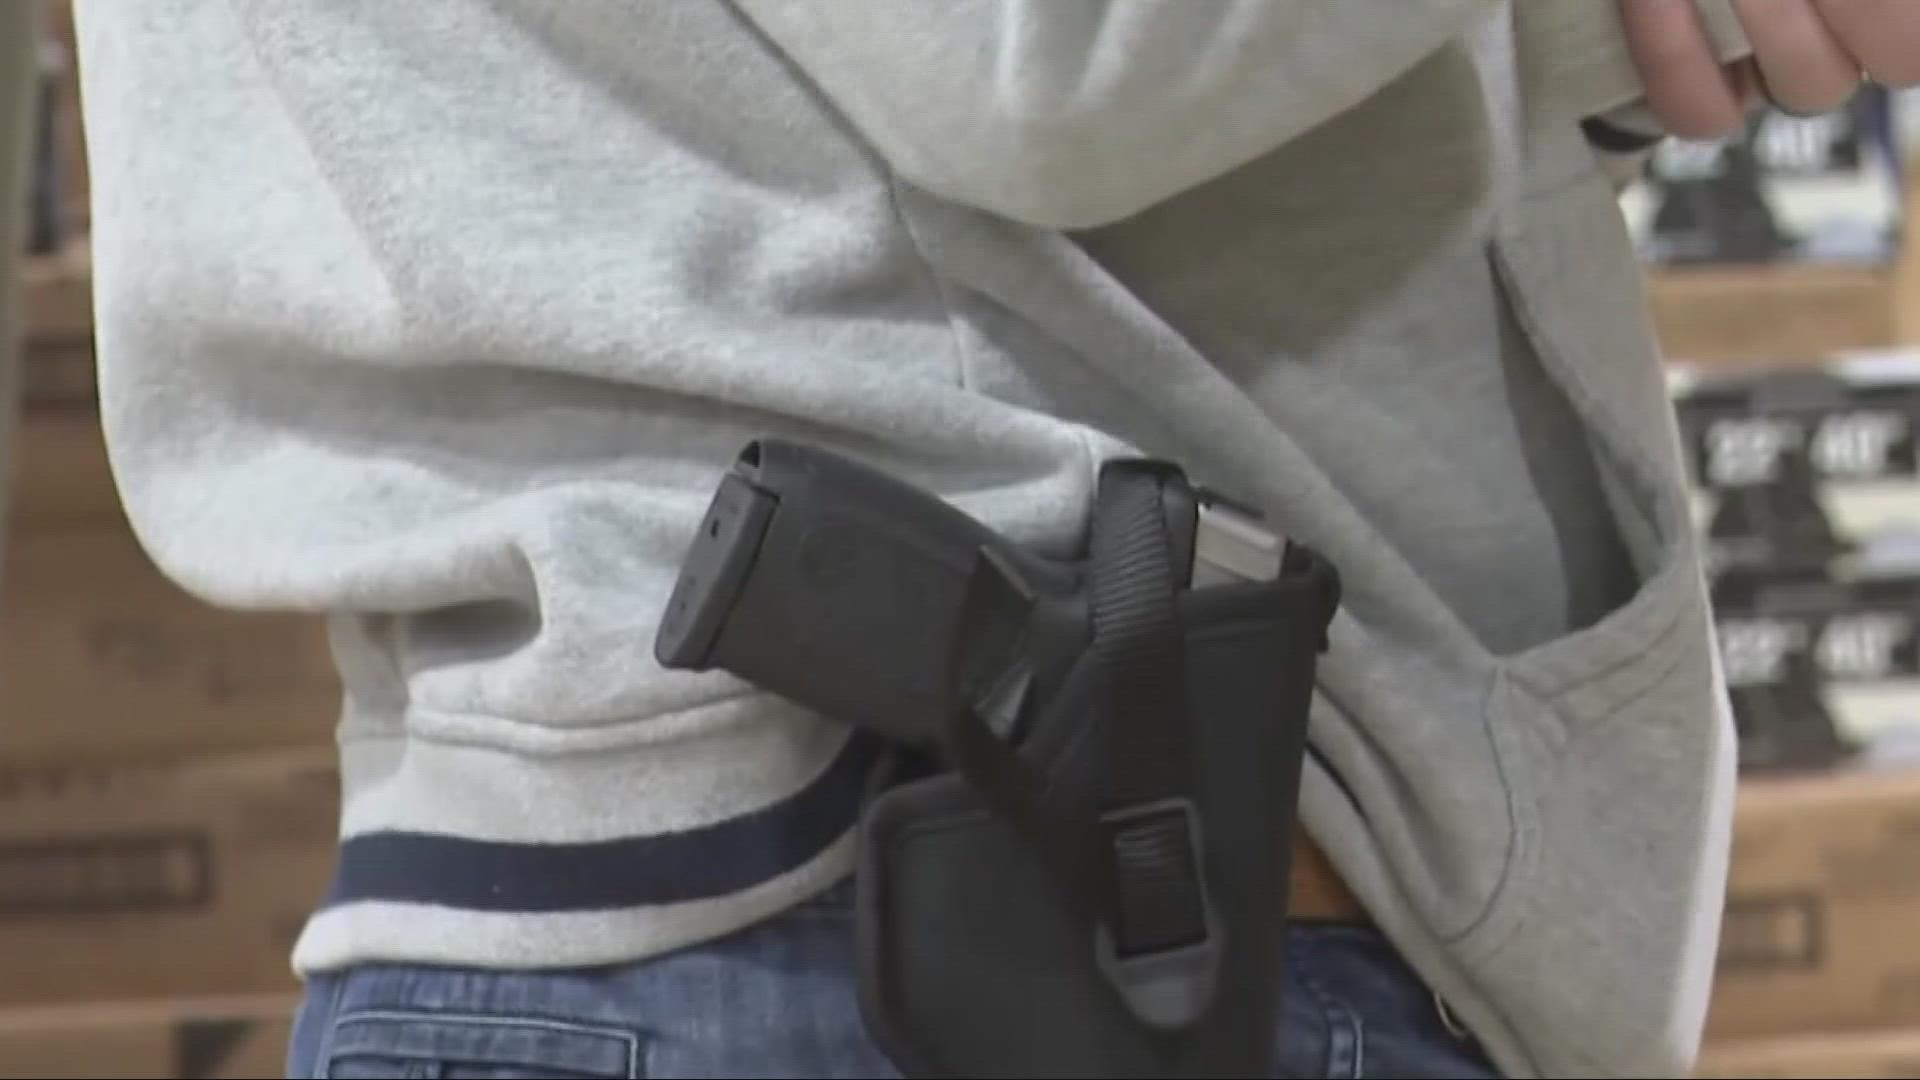 Senate Bill 215 allows legal gun owners to carry hidden firearm without the training and permit previously required.